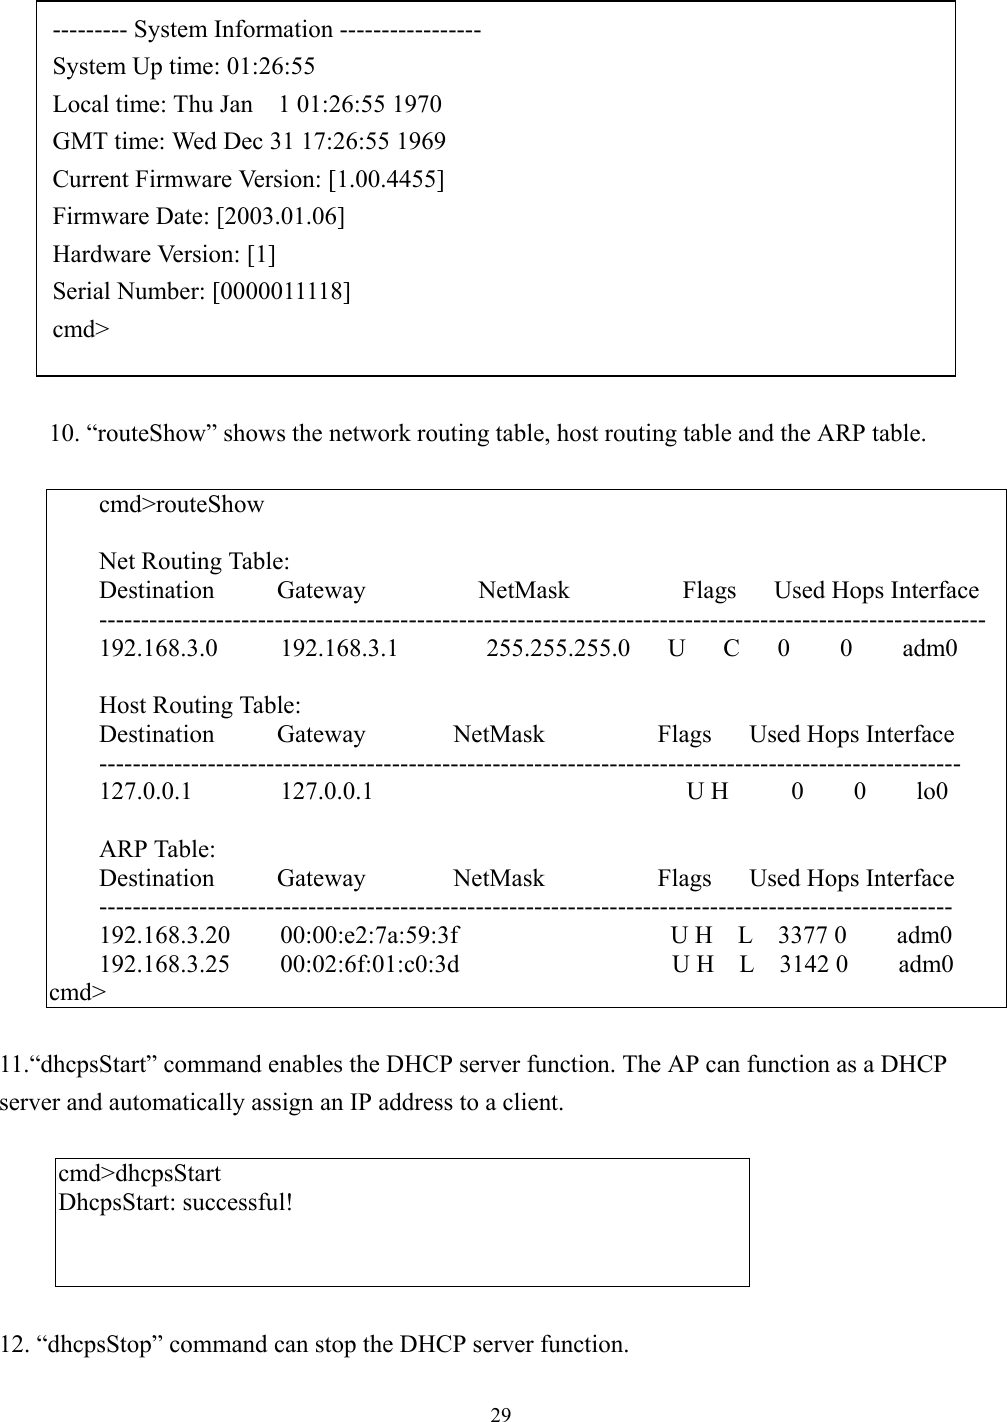 2910. “routeShow” shows the network routing table, host routing table and the ARP table.cmd&gt;routeShowNet Routing Table:Destination     Gateway         NetMask         Flags   Used Hops Interface----------------------------------------------------------------------------------------------------------192.168.3.0     192.168.3.1       255.255.255.0   U   C   0    0    adm0Host Routing Table:Destination     Gateway       NetMask         Flags   Used Hops Interface-------------------------------------------------------------------------------------------------------127.0.0.1       127.0.0.1                         U H     0    0    lo0ARP Table:Destination     Gateway       NetMask         Flags   Used Hops Interface------------------------------------------------------------------------------------------------------192.168.3.20    00:00:e2:7a:59:3f                 U H  L  3377 0    adm0192.168.3.25    00:02:6f:01:c0:3d                 U H  L  3142 0    adm0cmd&gt;11.“dhcpsStart” command enables the DHCP server function. The AP can function as a DHCPserver and automatically assign an IP address to a client.cmd&gt;dhcpsStartDhcpsStart: successful!12. “dhcpsStop” command can stop the DHCP server function.--------- System Information -----------------System Up time: 01:26:55Local time: Thu Jan    1 01:26:55 1970GMT time: Wed Dec 31 17:26:55 1969Current Firmware Version: [1.00.4455]Firmware Date: [2003.01.06]Hardware Version: [1]Serial Number: [0000011118]cmd&gt;